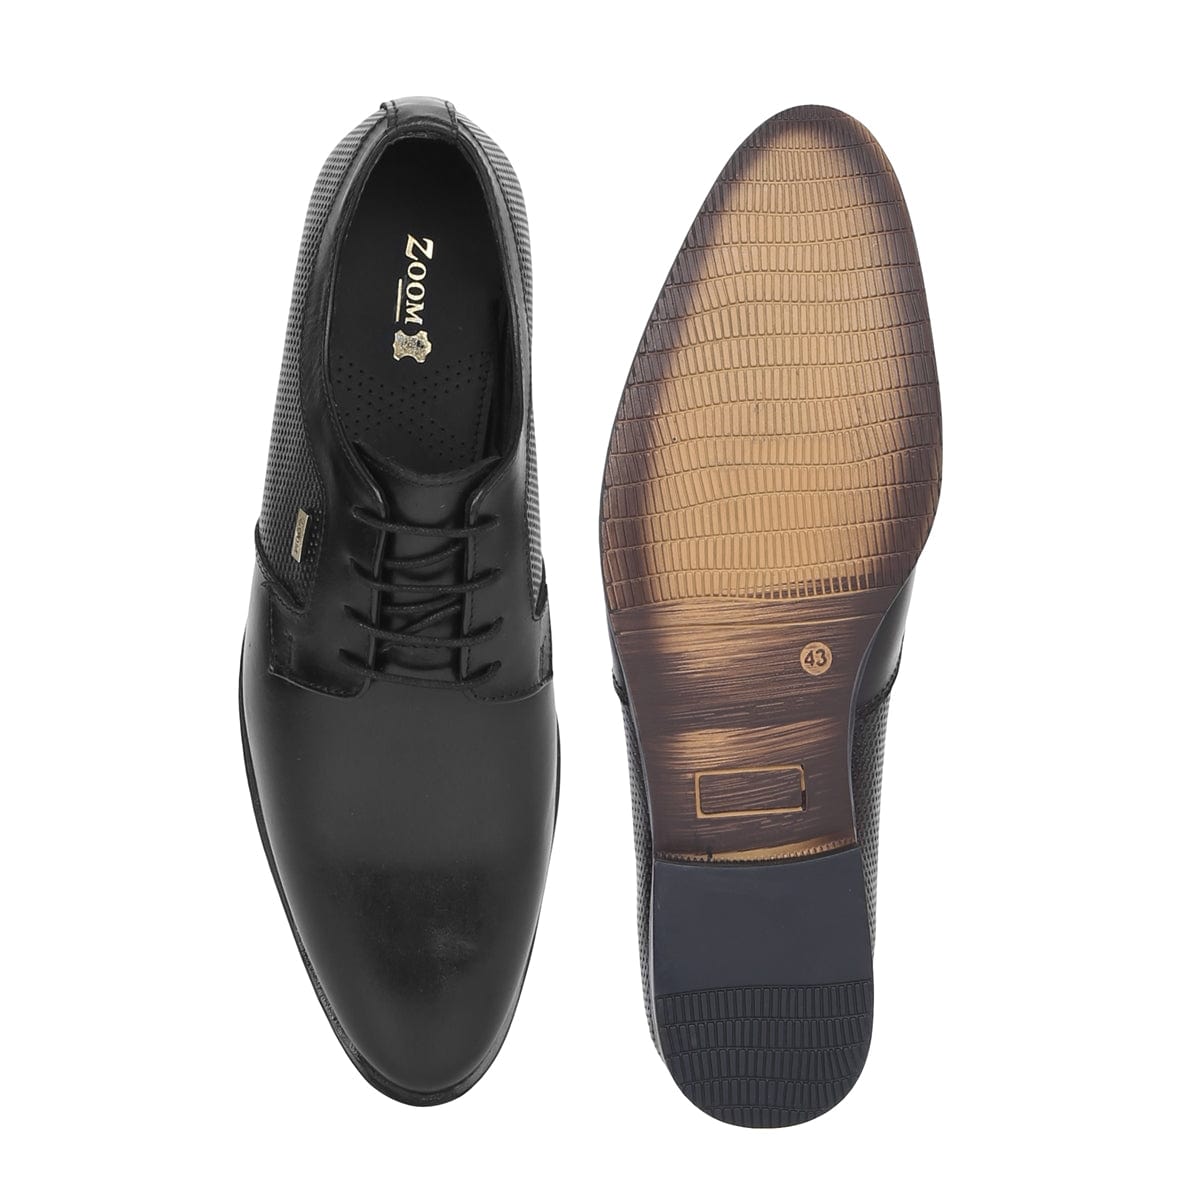 Zoom Shoes™ Formal Leather Shoes for Men S-3270